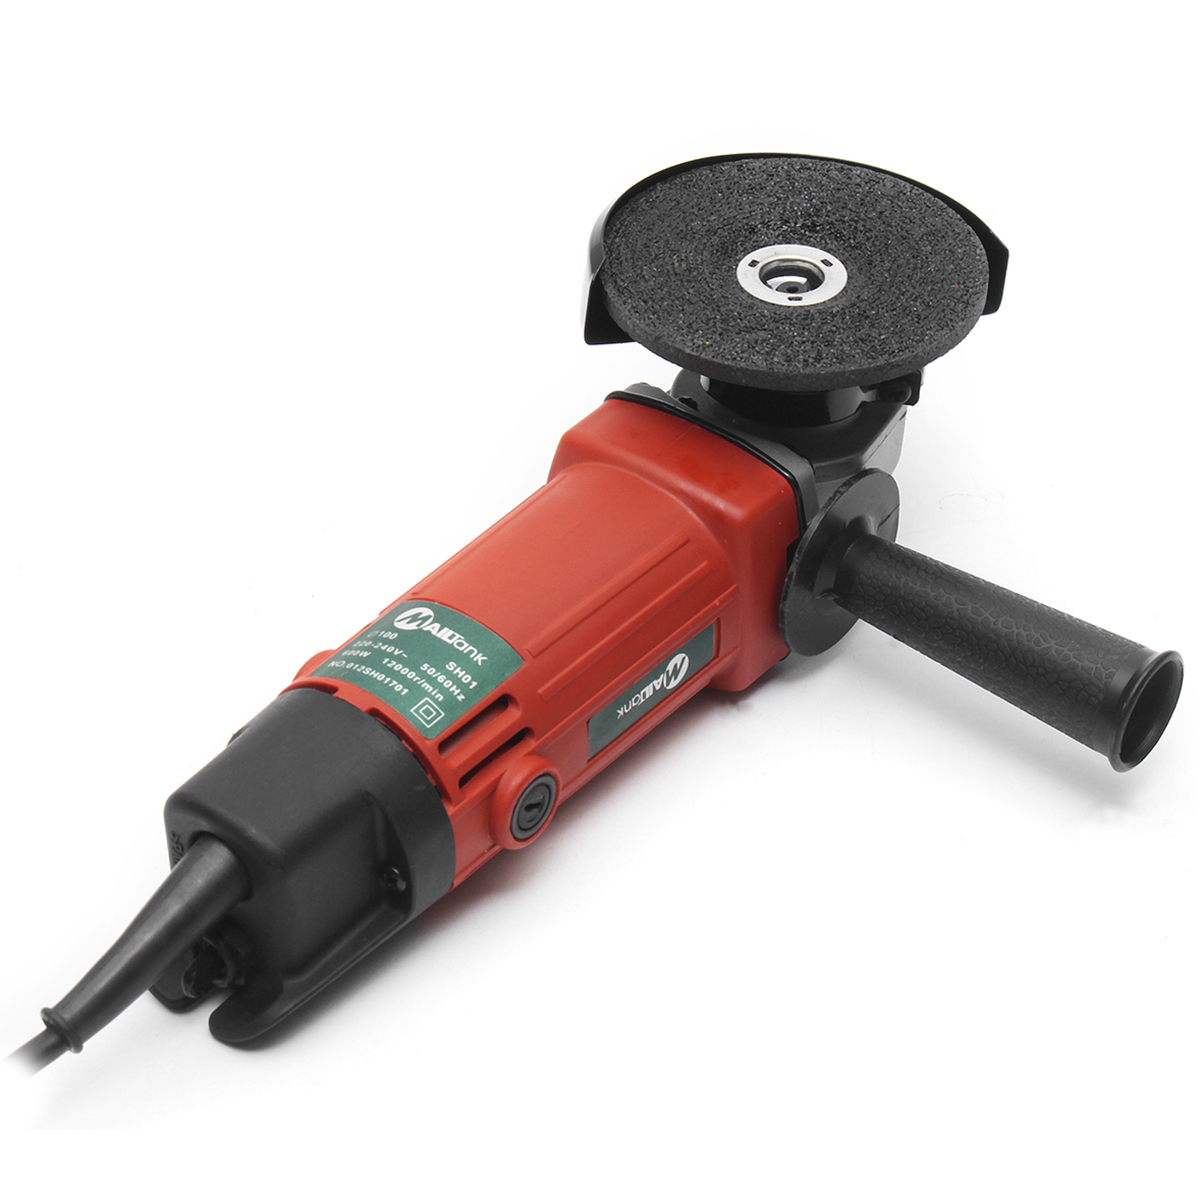 220V-600W-Multifunctional-Electric-Angle-Grinder-Polishing-Machine-Metal-Grinding-Cutter-Tool-1292095-7